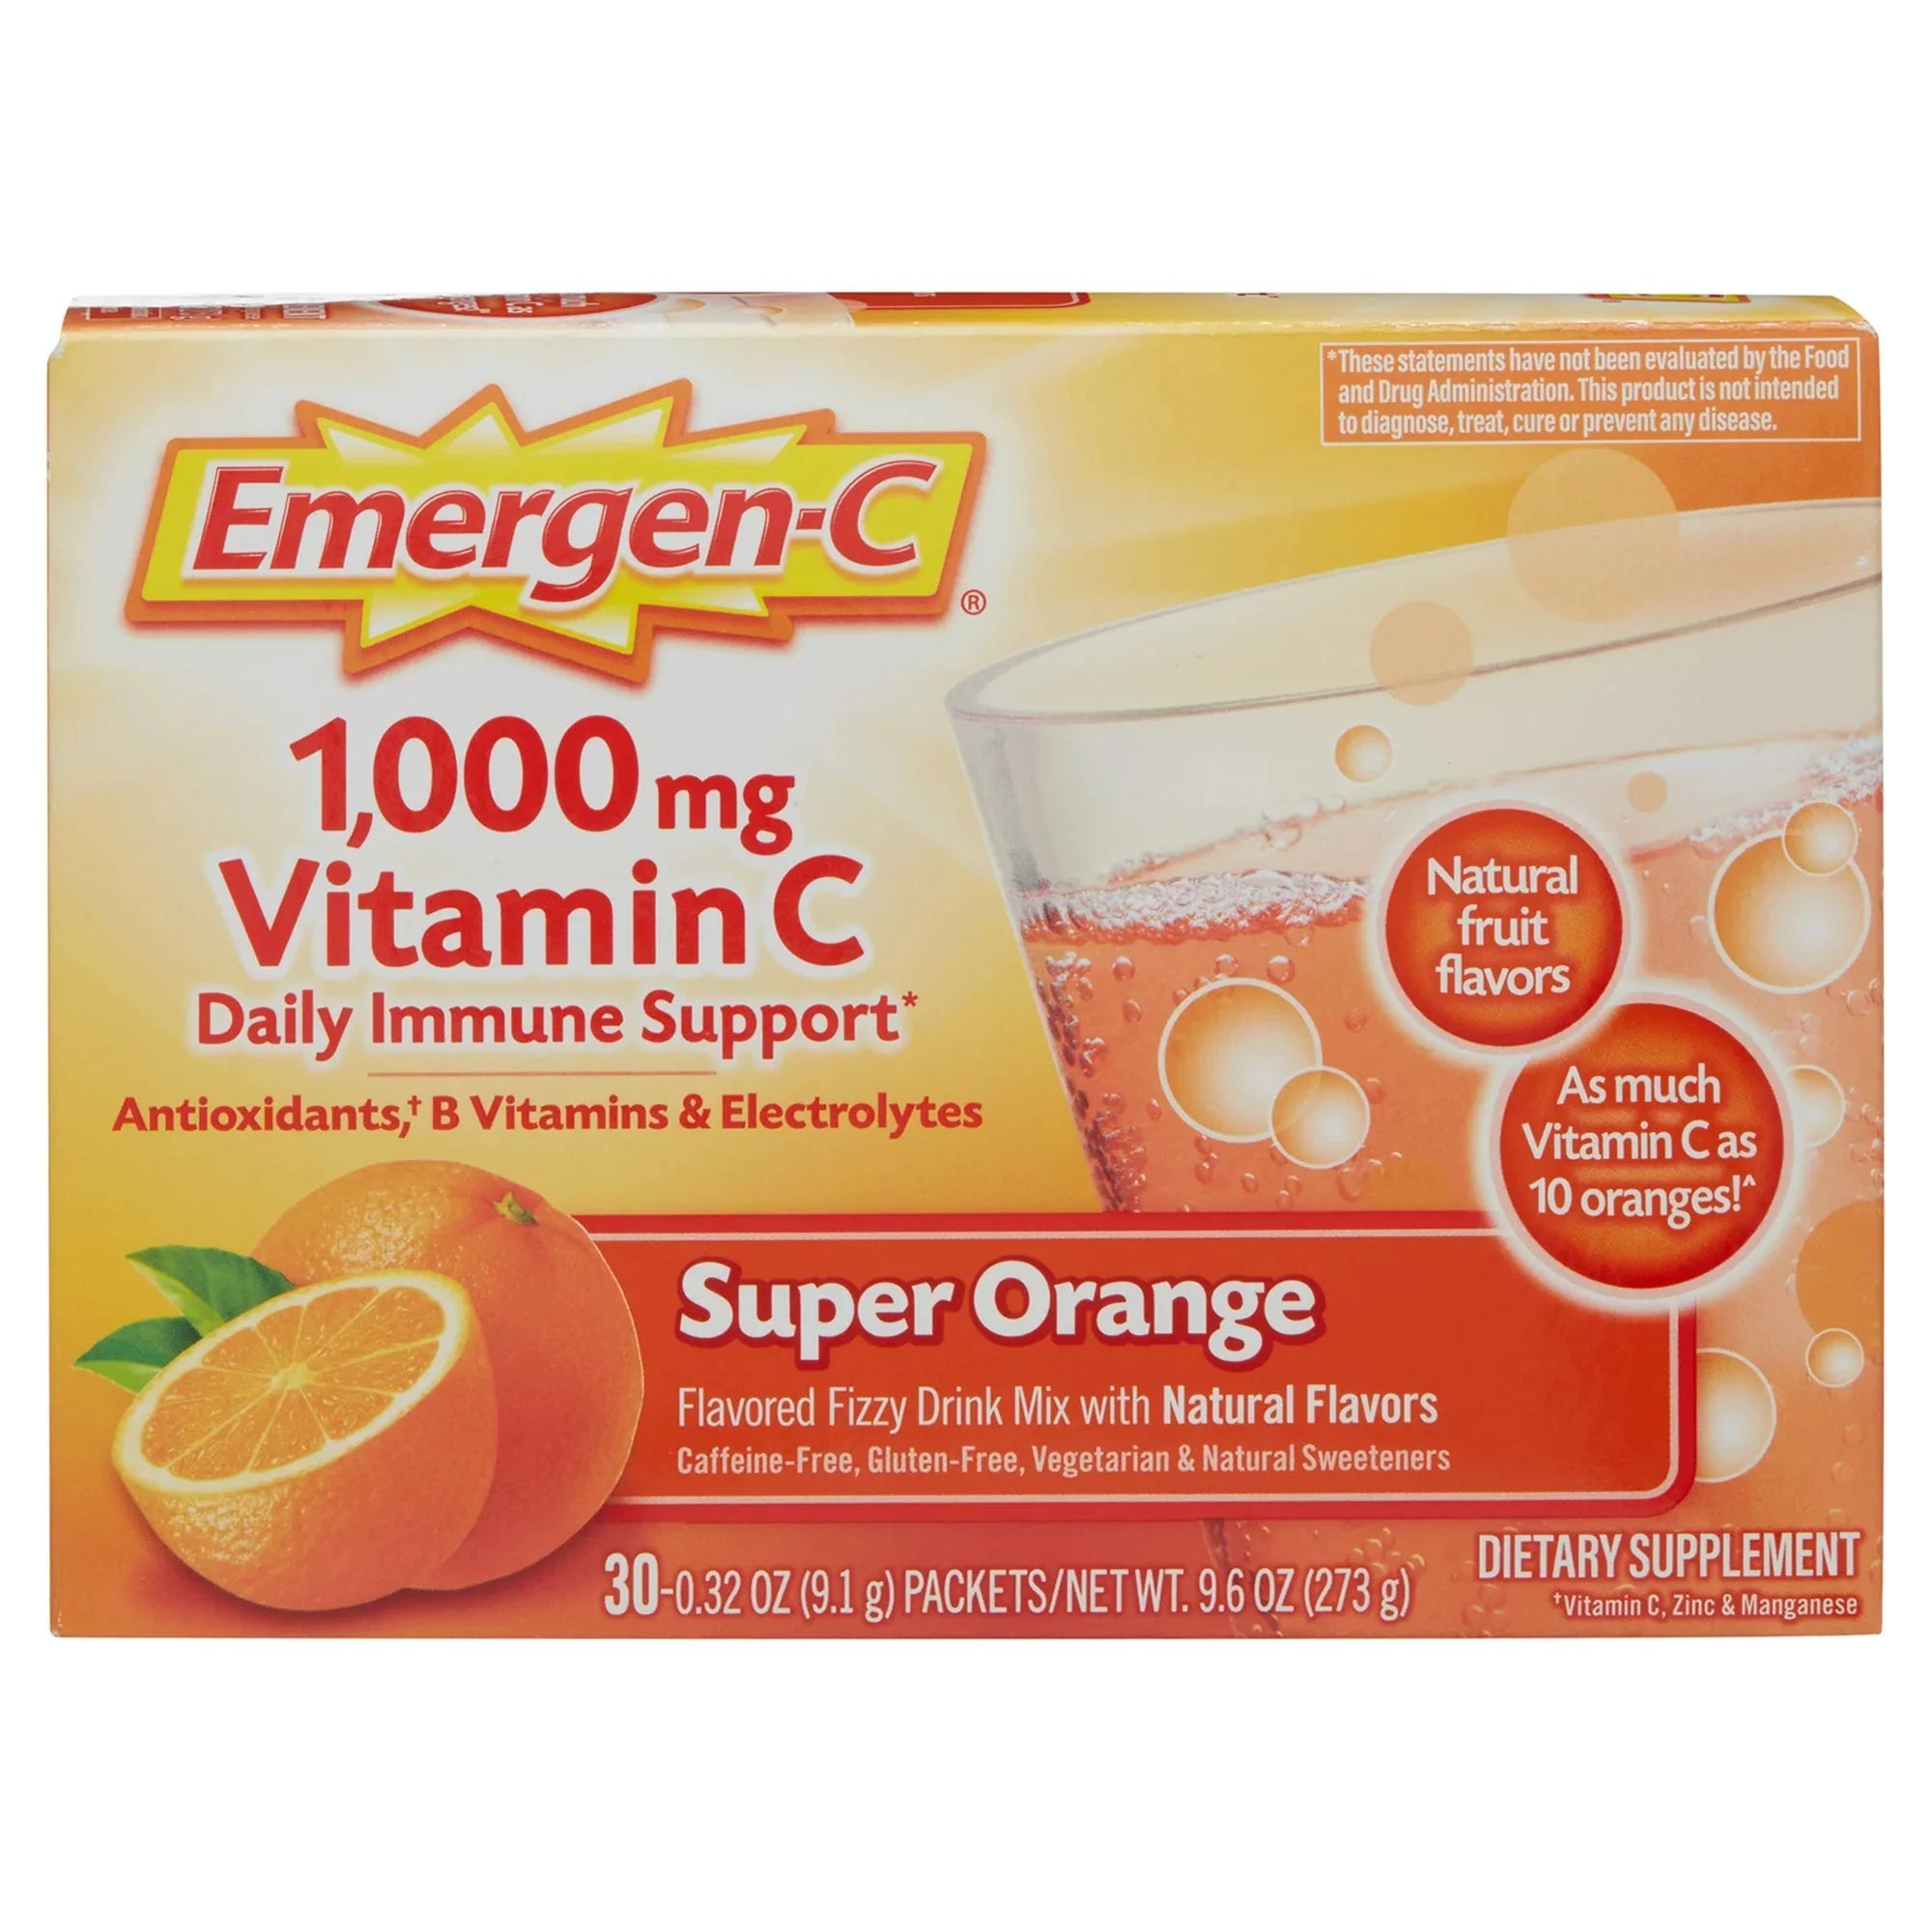 Wholesale prices with free shipping all over United States Emergen-C 1000Mg Vitamin C Powder for Immune Support Super Orange - 30 Ct - Steven Deals